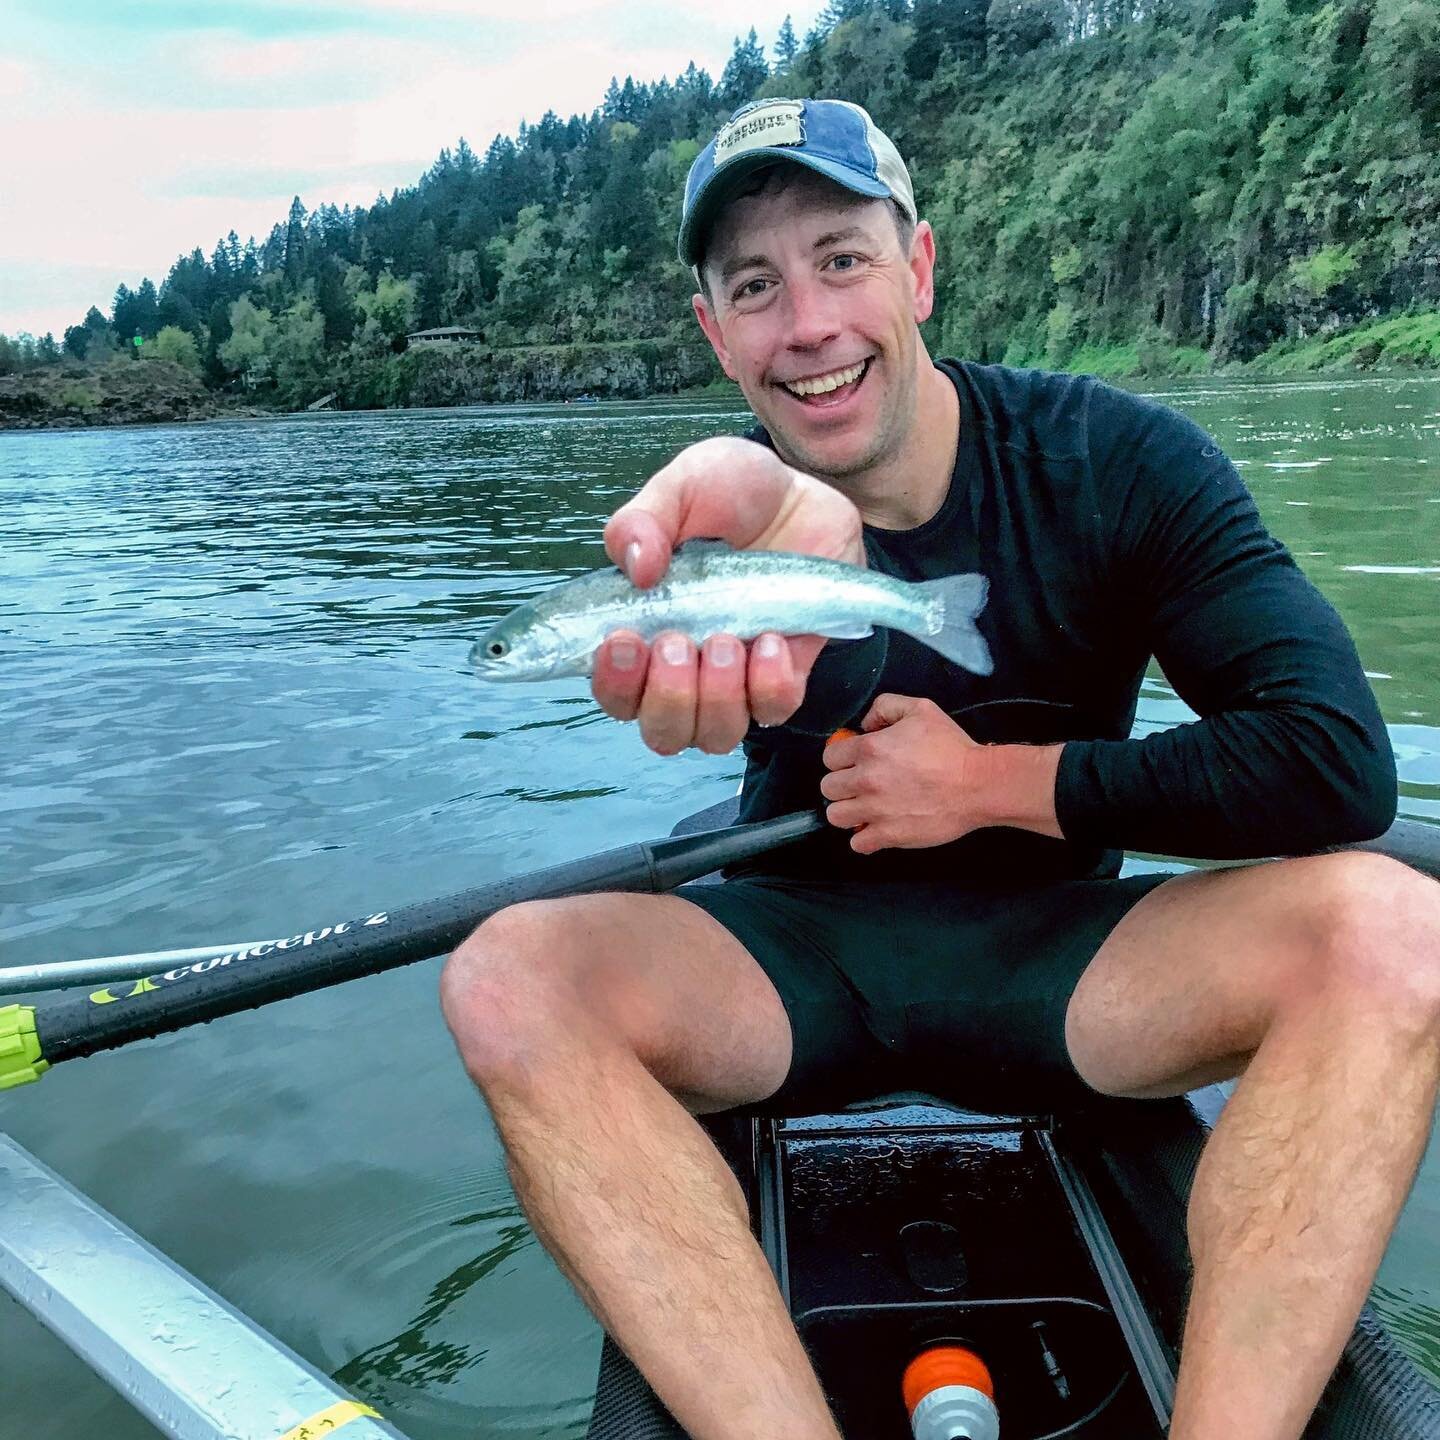 Masters rower Steven catching an entirely less common aquatic species than the kind more familiar to most of us rowers! No #rowingcrabs here!